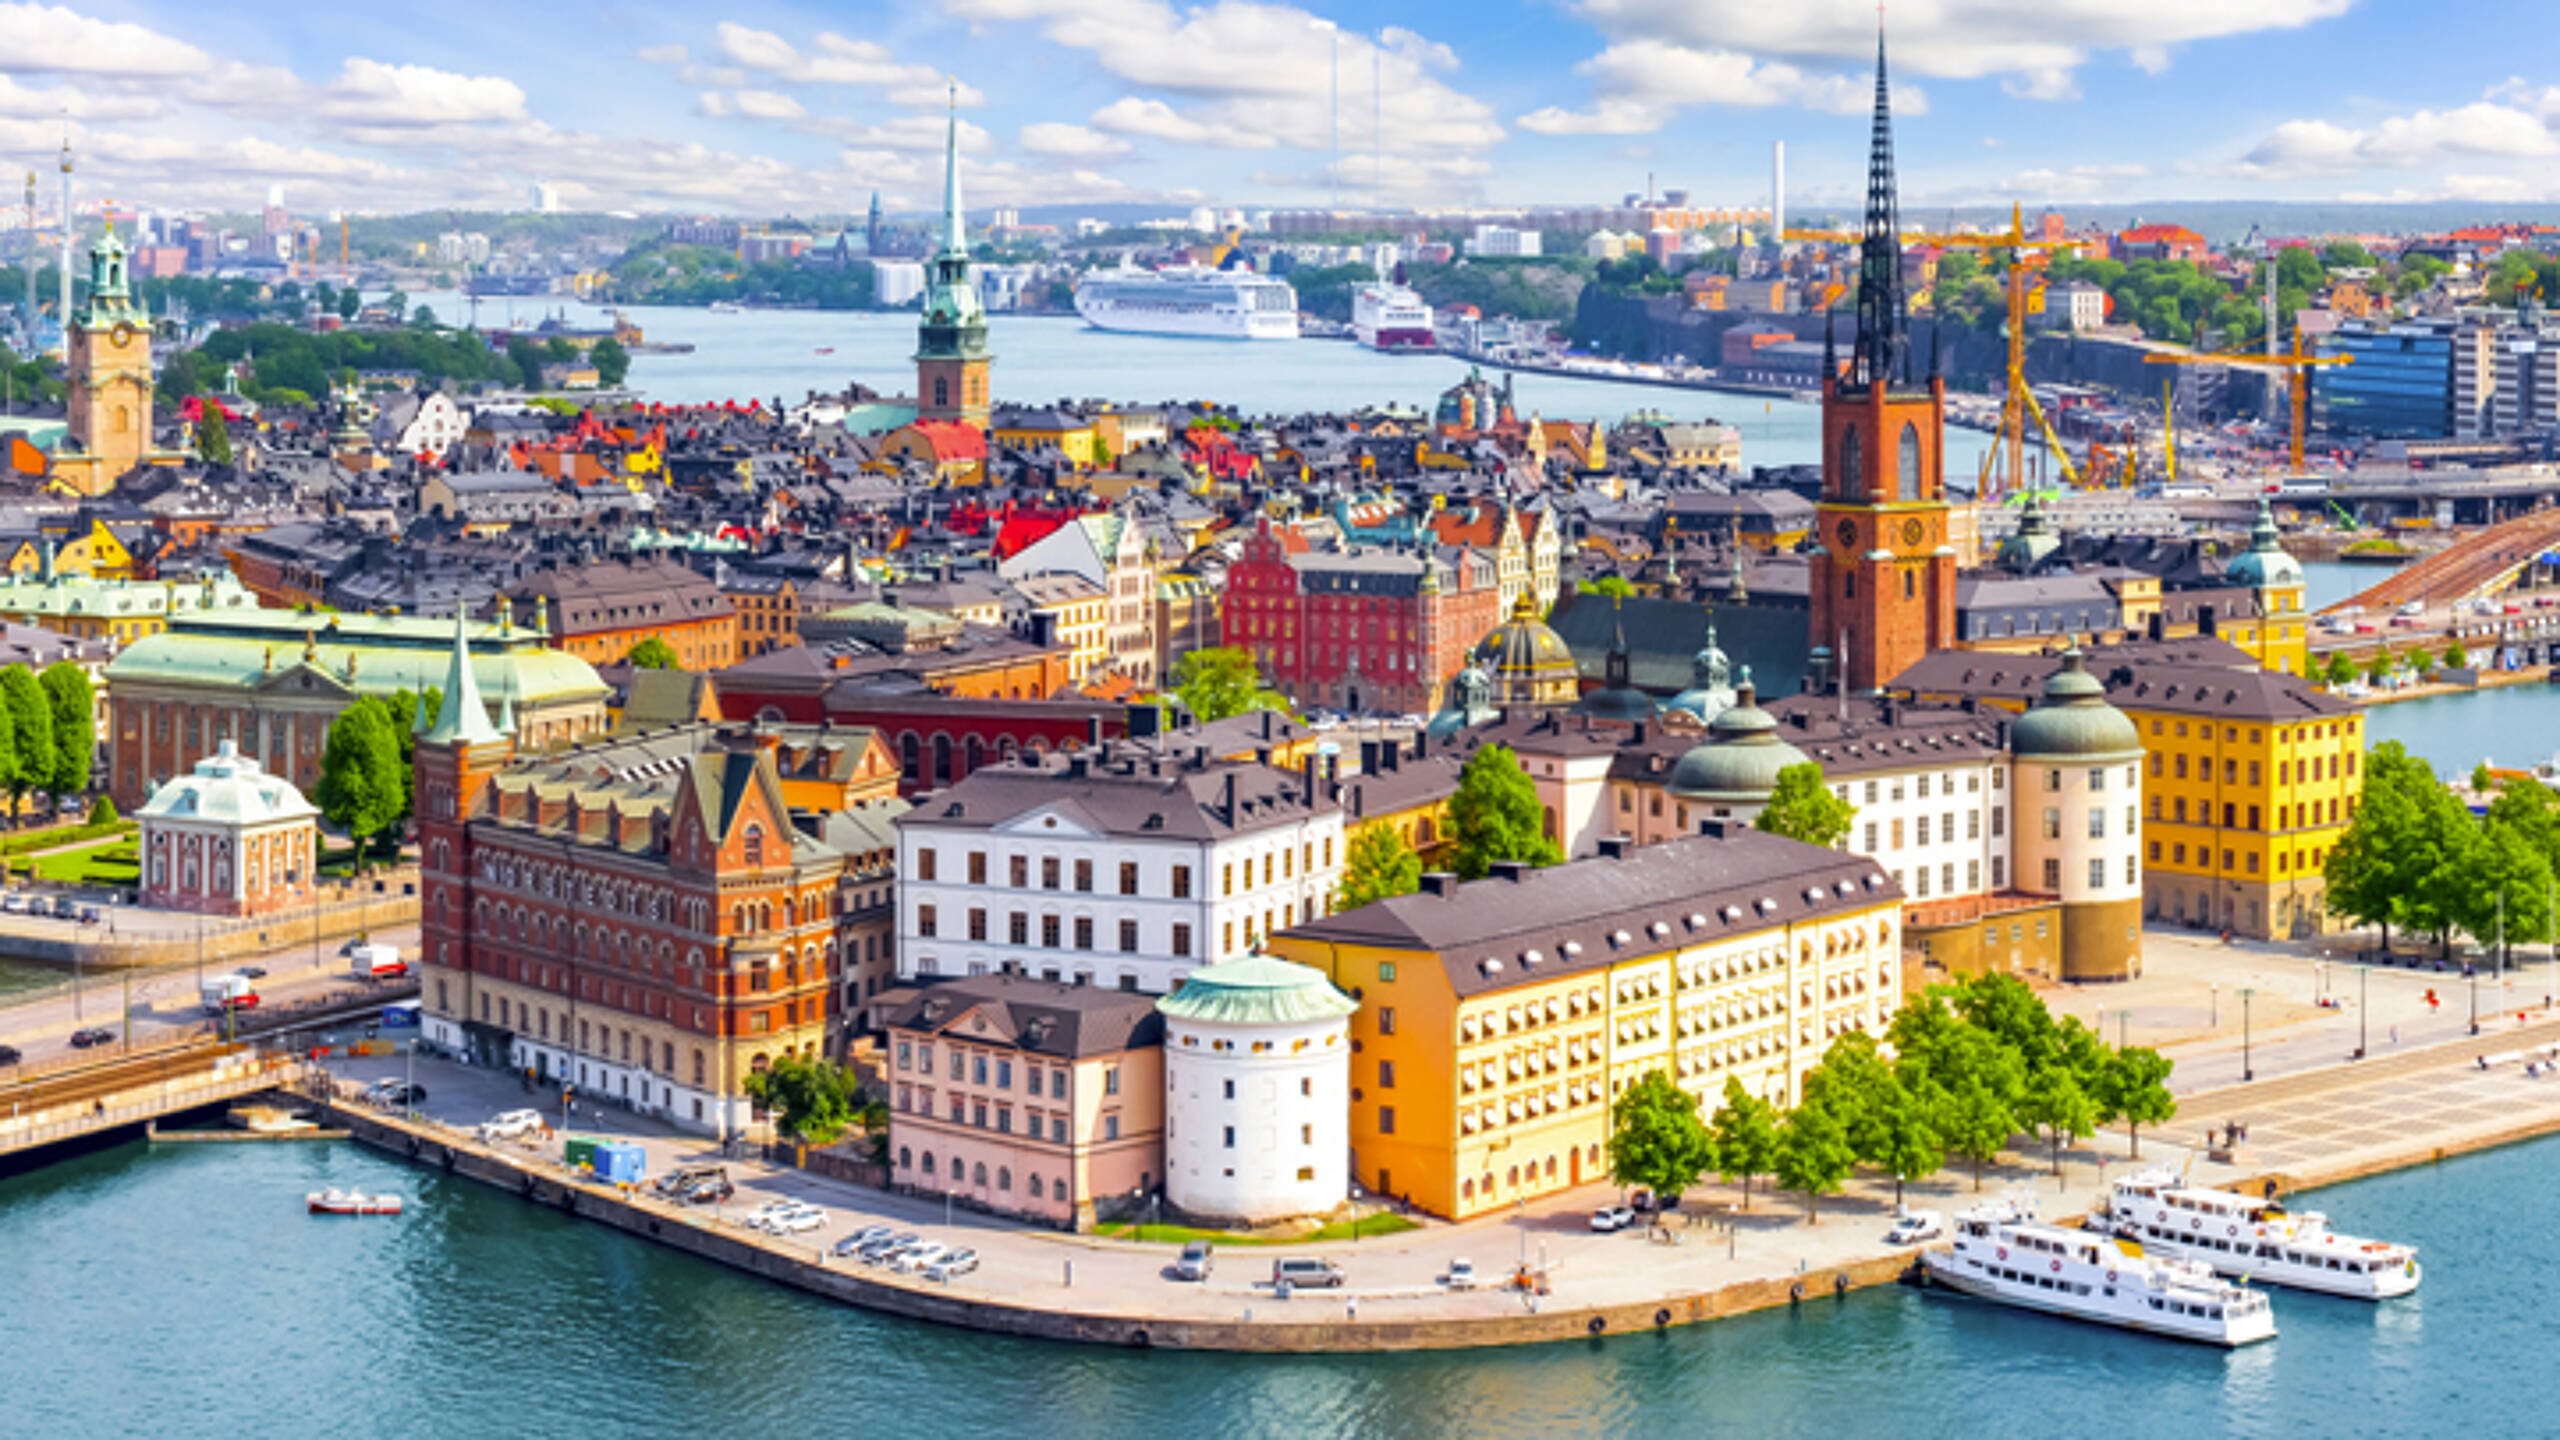 Stockholm+50: A climate failure of five decades?